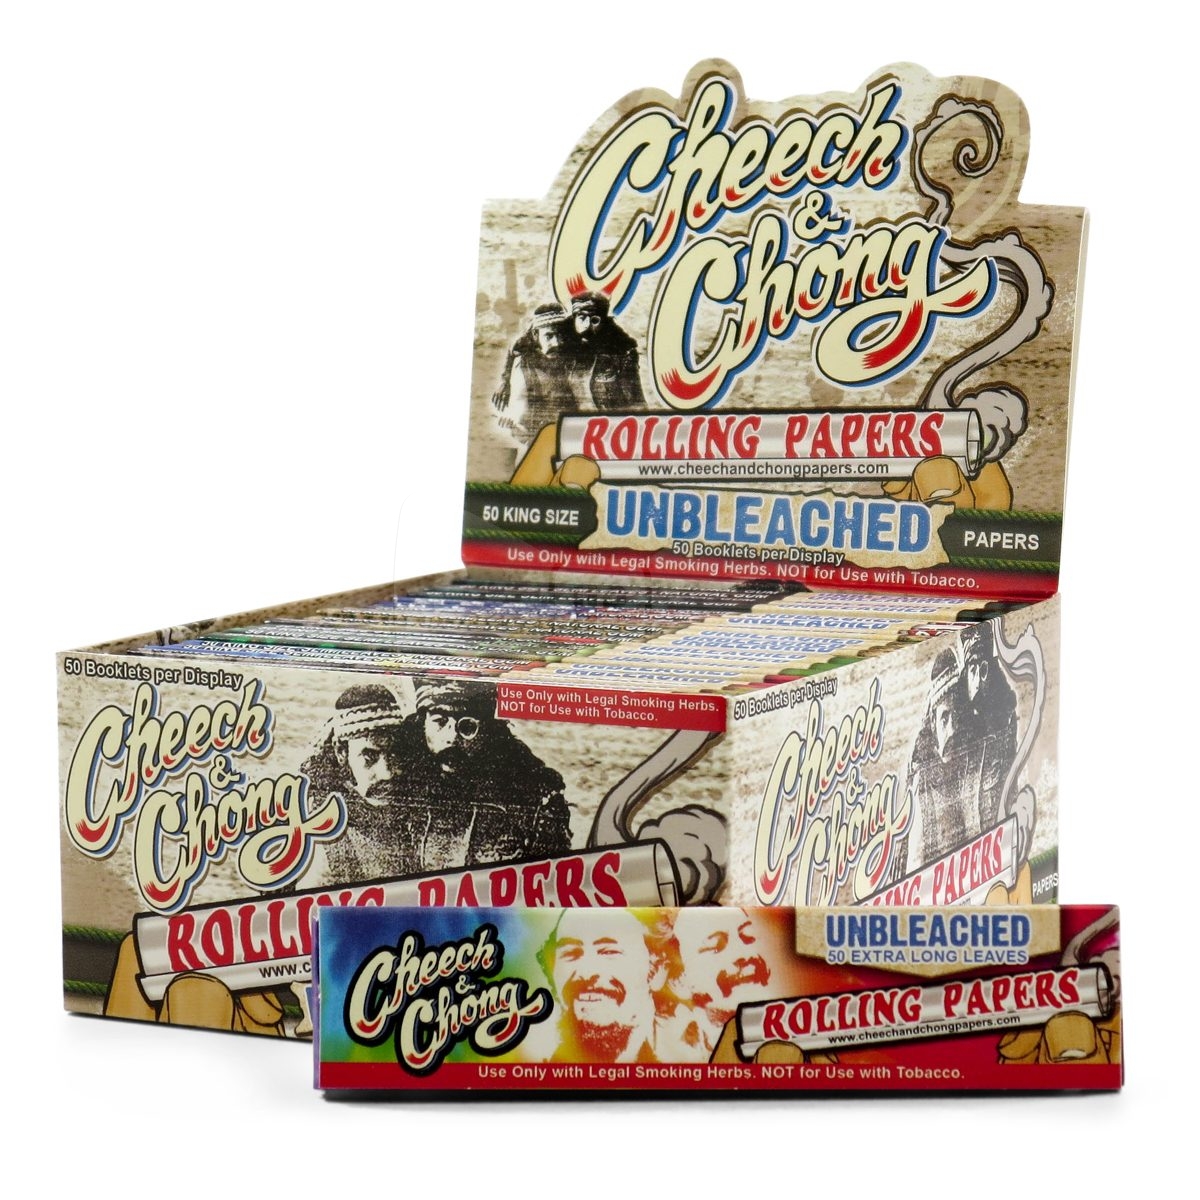 Cheech and Chong Unbleached King Size Rolling Papers Box